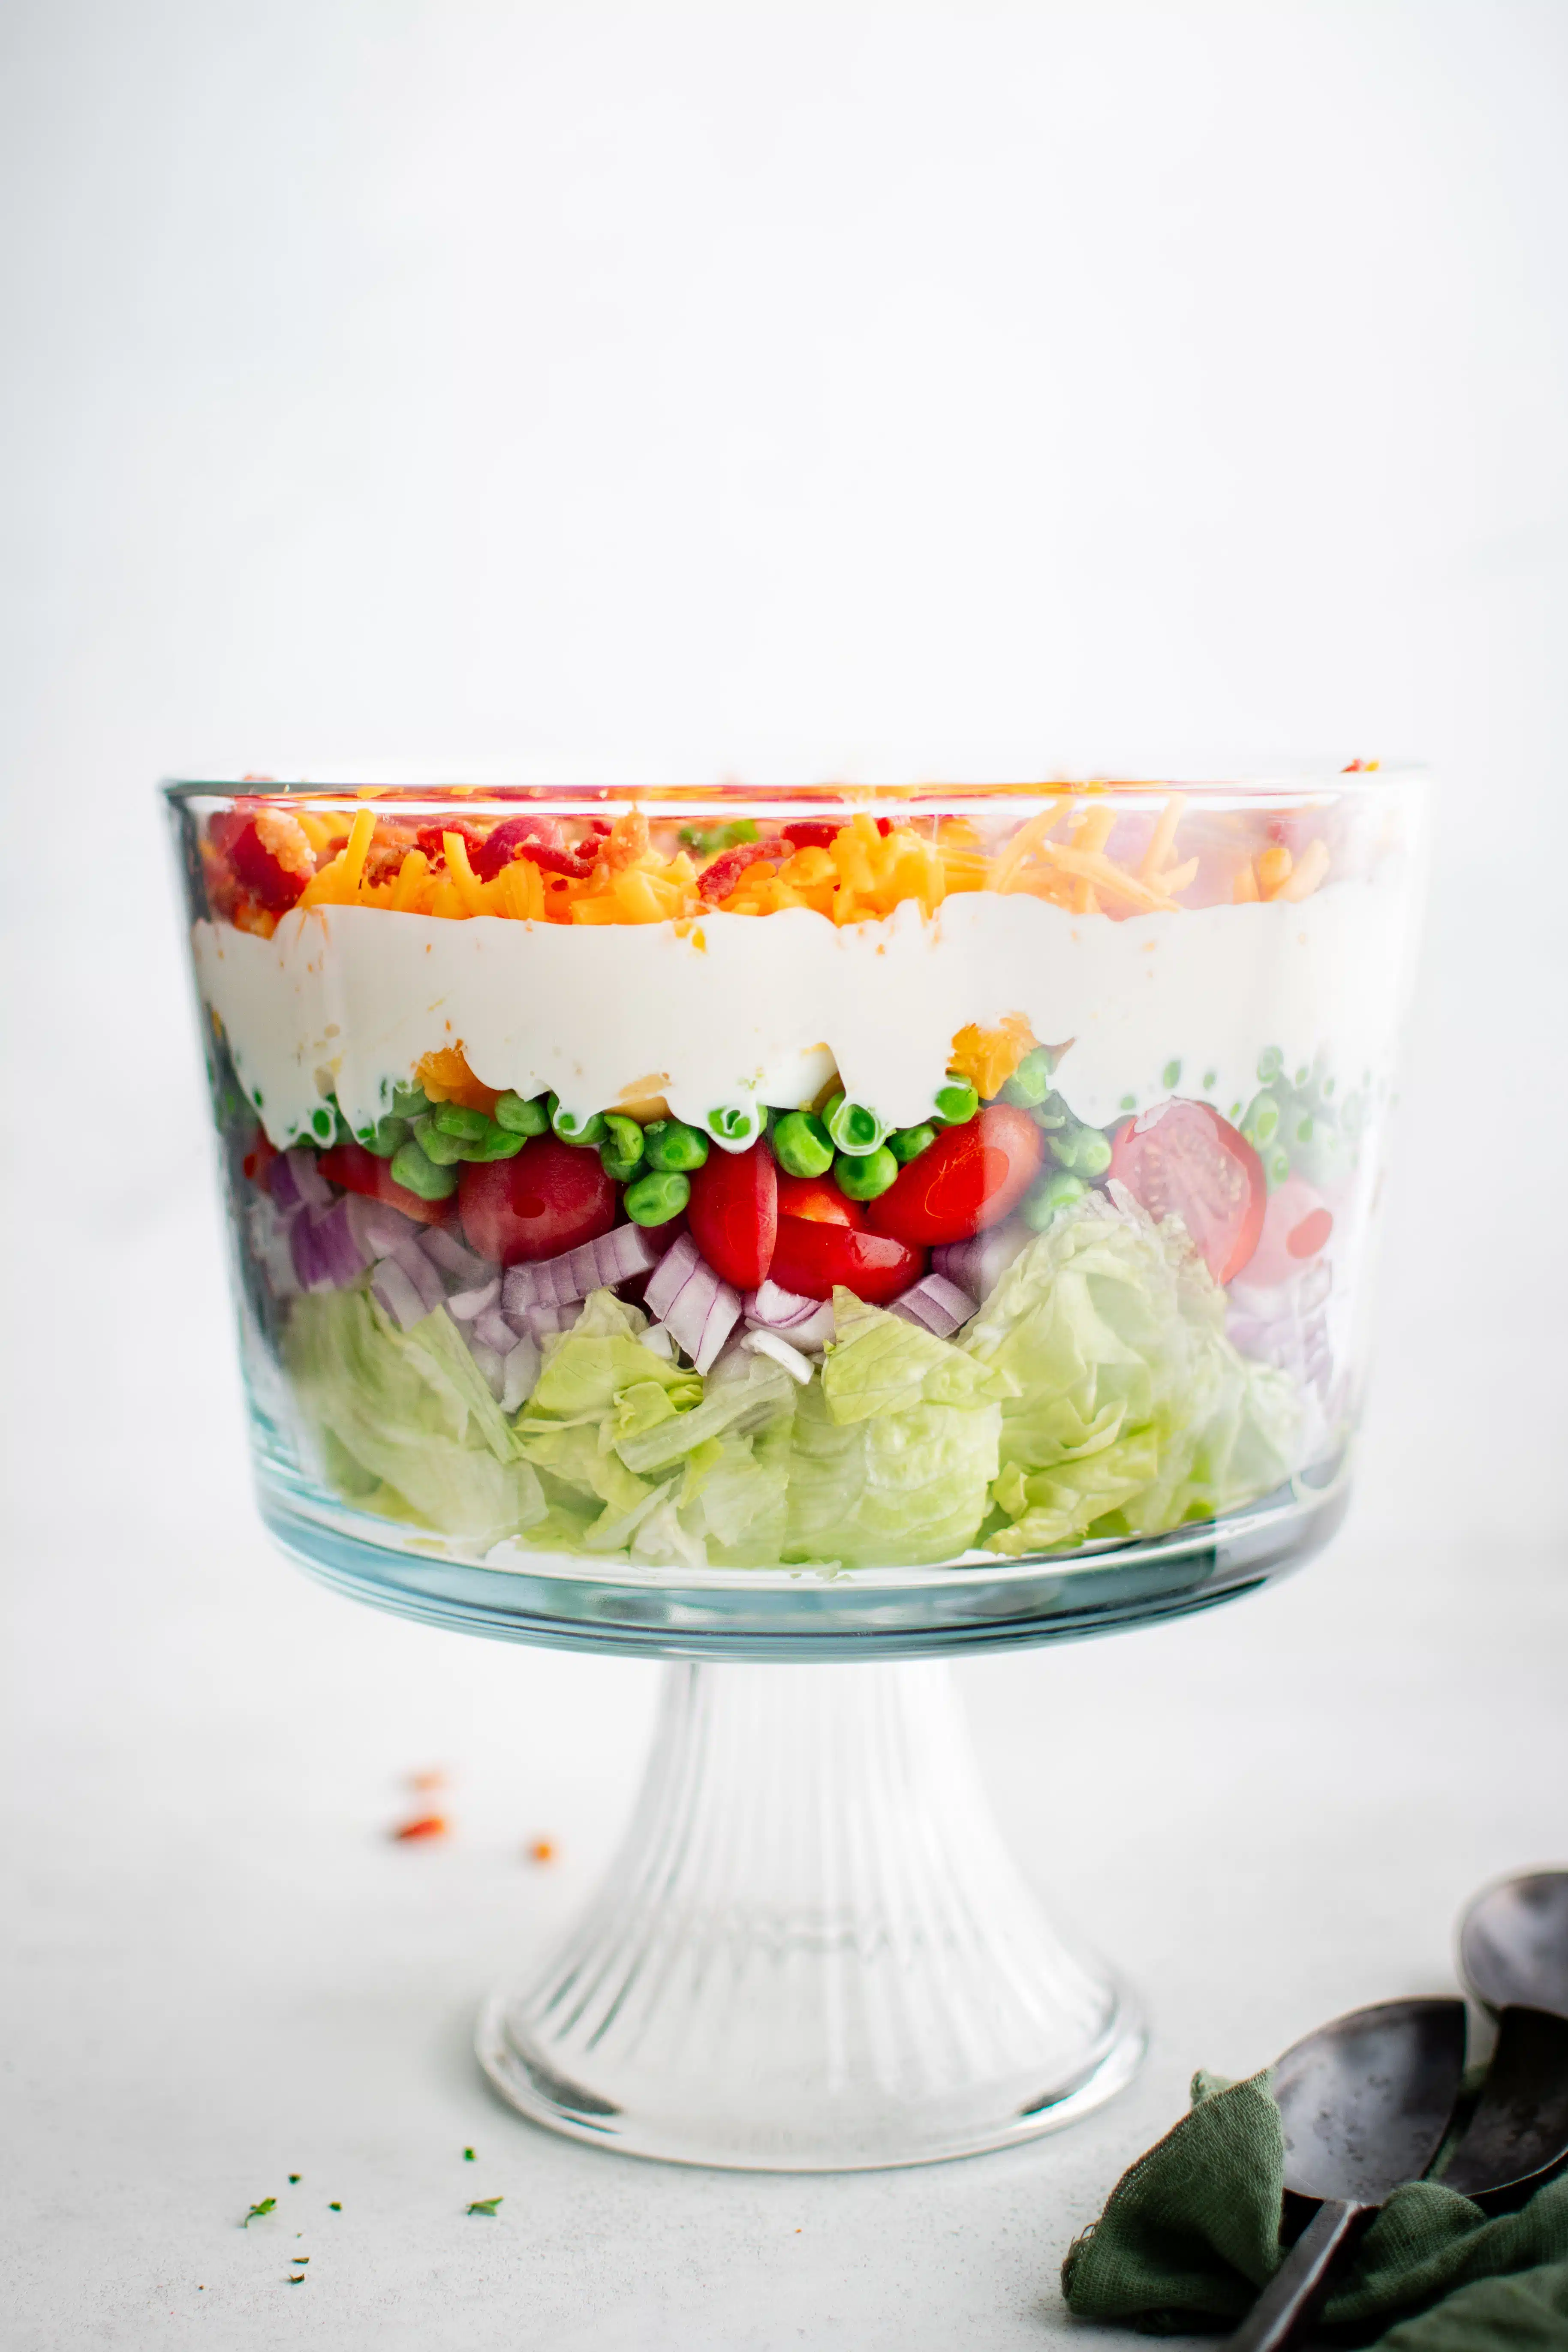 Beautifully layered traditional 7 layer salad starting with chopped iceberg lettuce on the bottom, followed by chopped red onion, sliced cherry tomatoes, green peas, chopped hard boiled eggs, creamy mayonnaise dressing, shredded cheddar cheese, and bacon bits on the top.